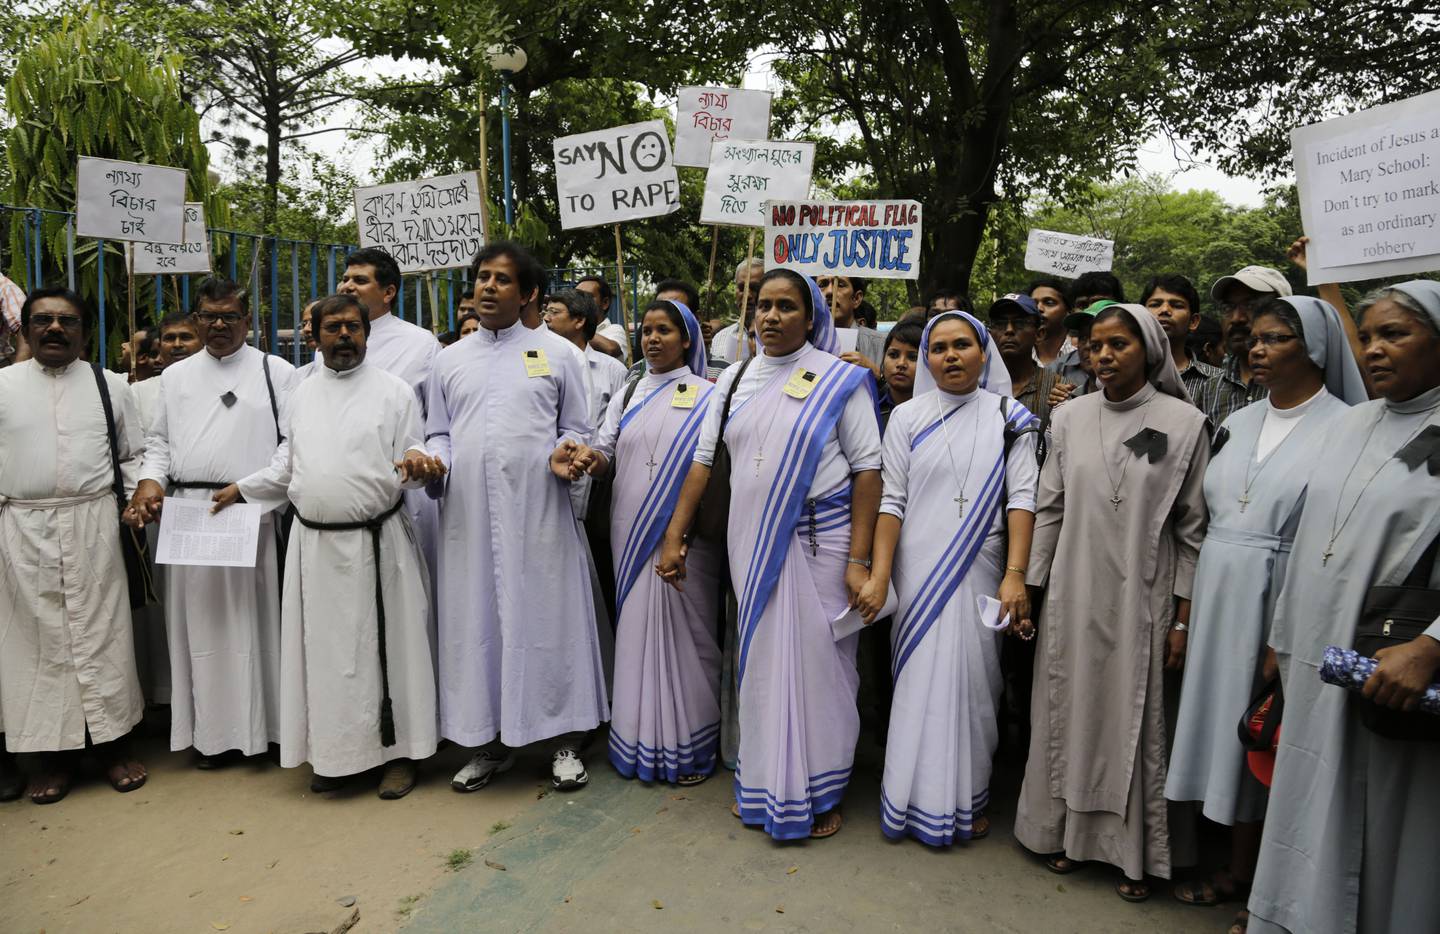 Christian nuns and priests participate in an all-religion silent rally protesting the rape of an elderly nun at a convent in Ranaghat, in Kolkata, India, Wednesday, March 18, 2015. A nun in her 70s was gang-raped by a group of bandits when she tried to prevent them from committing a robbery in the Convent of Jesus and Mary School in West Bengal state's Nadia district, according to police. (AP Photo/ Bikas Das)